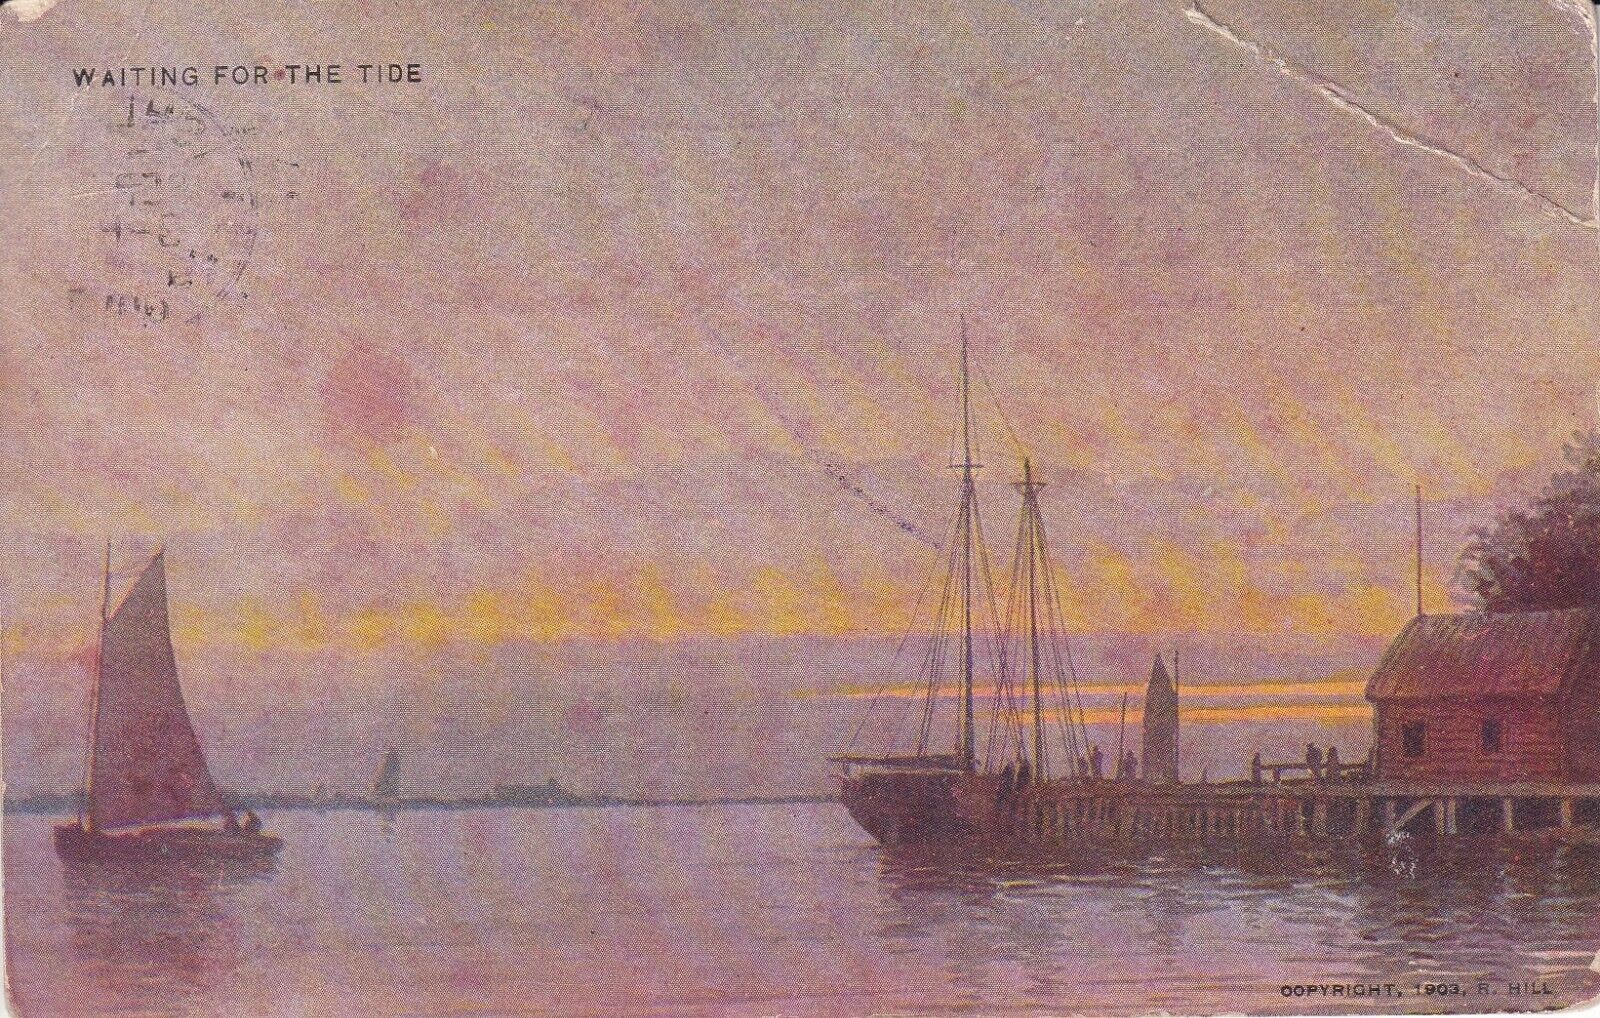 Postcard Art Waiting for the Tide Boats at Dock at Sunrise c1903 5Z